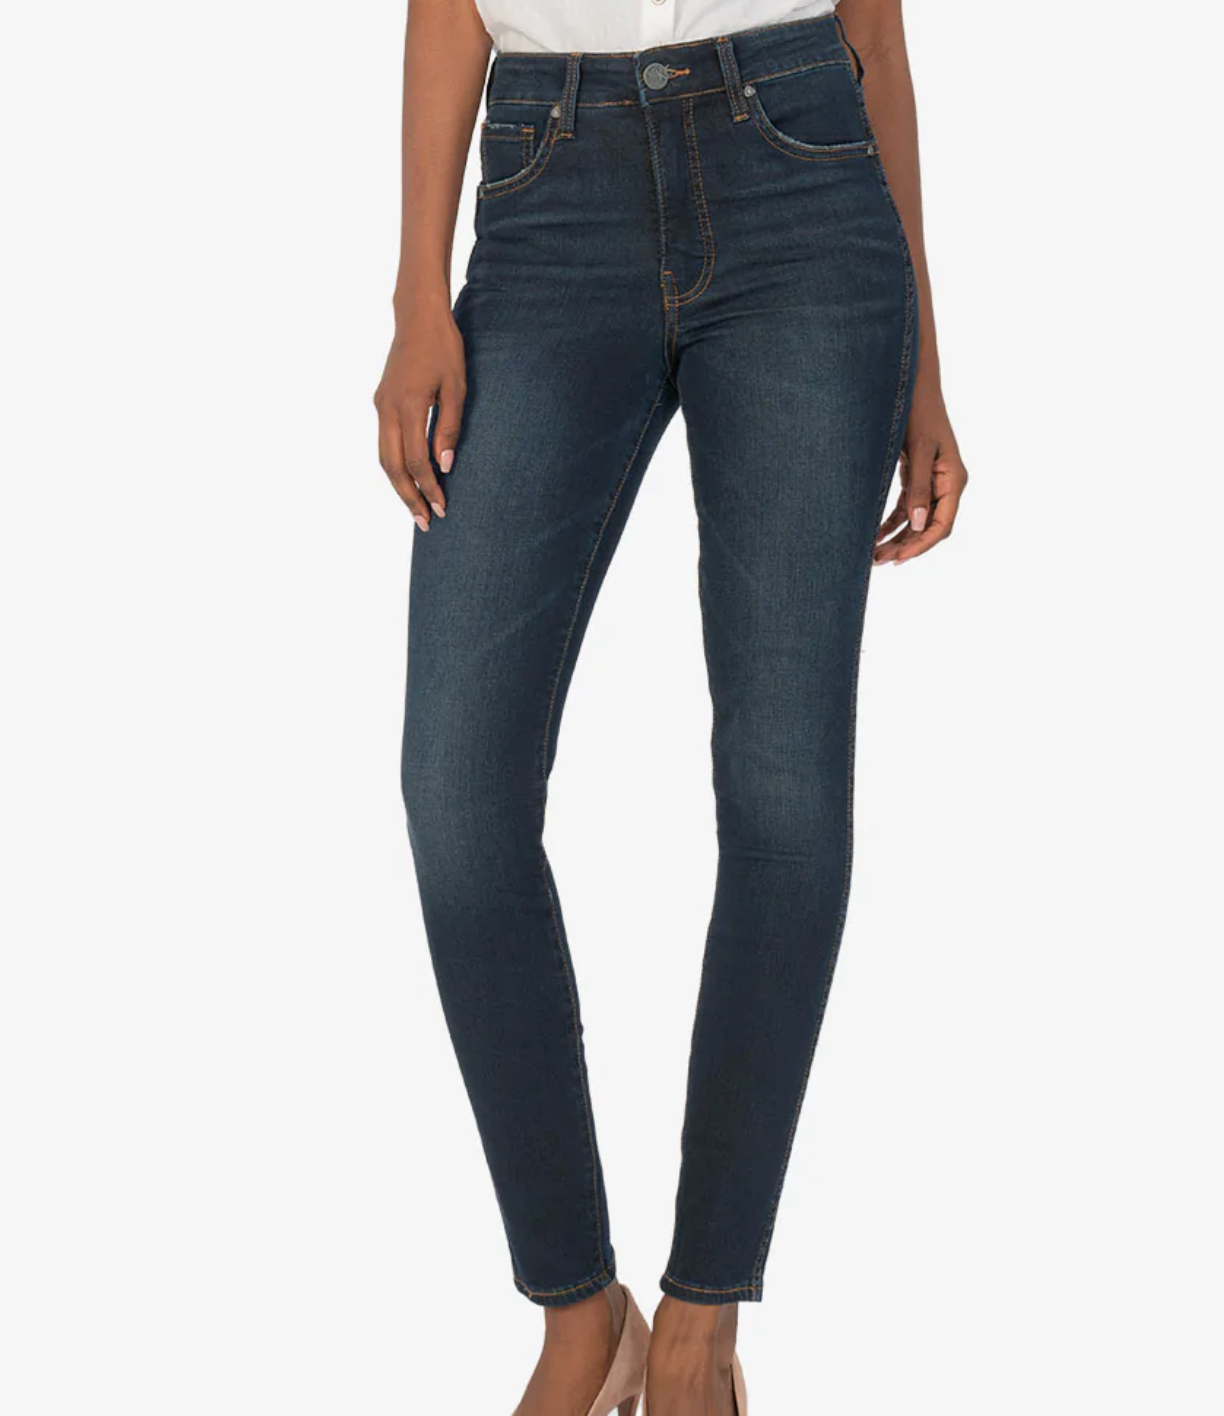 MIA TOOTHPICK SKINNY By Kut from the Kloth